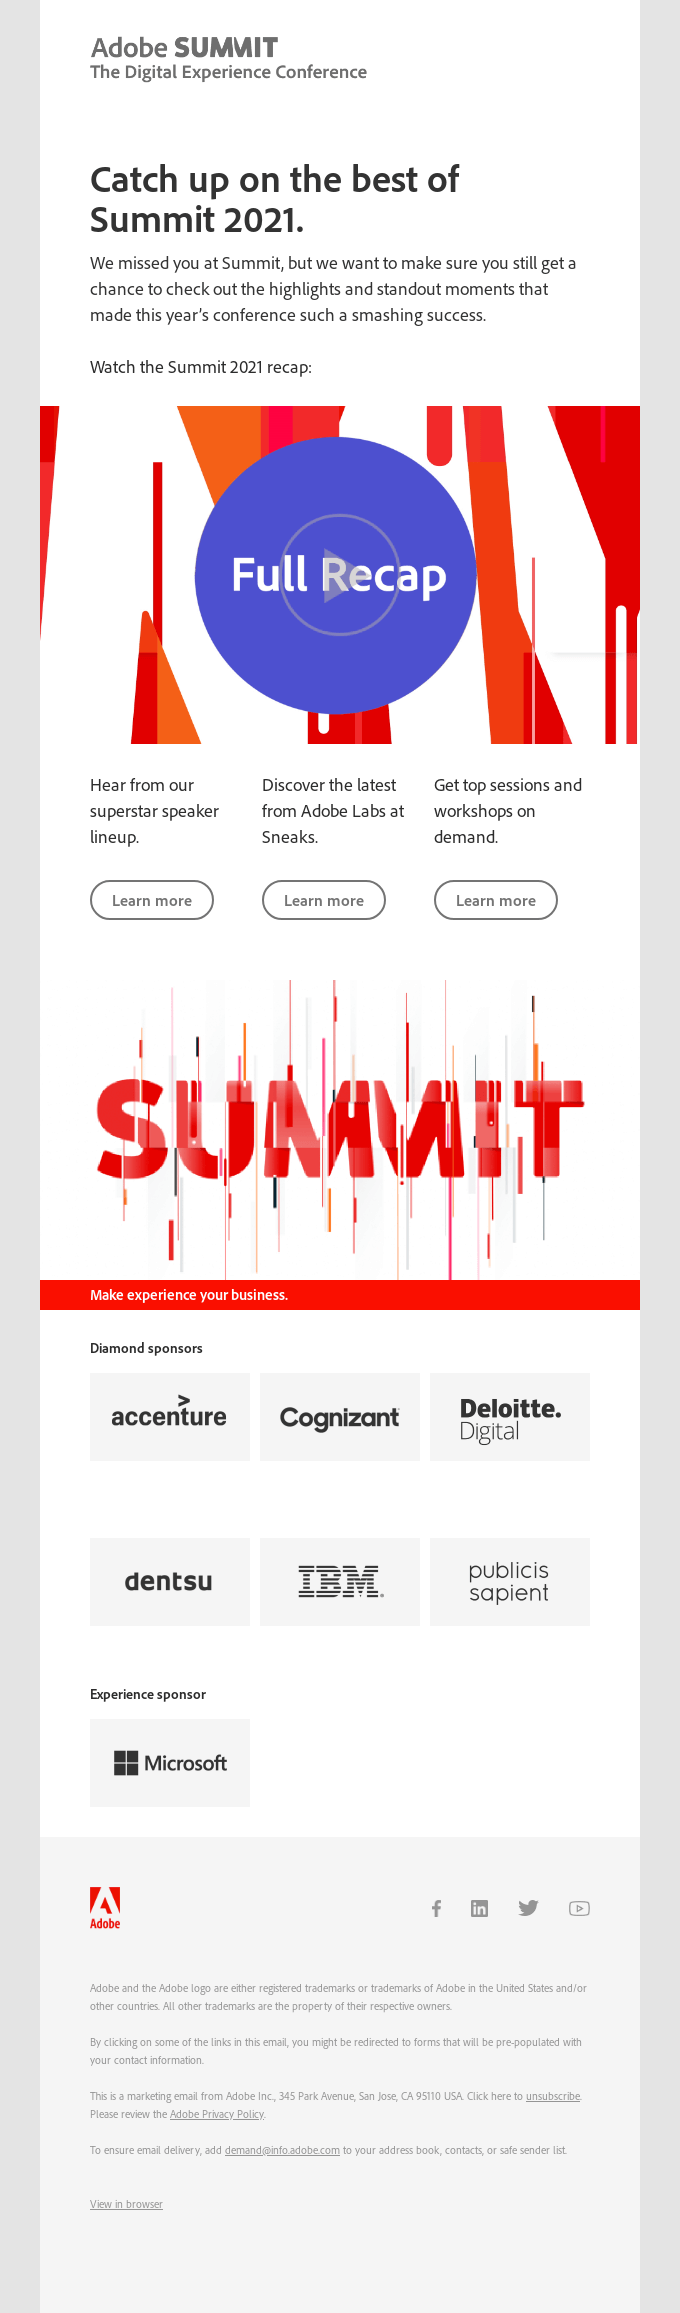 We missed you at Summit - Adobe Email Newsletter